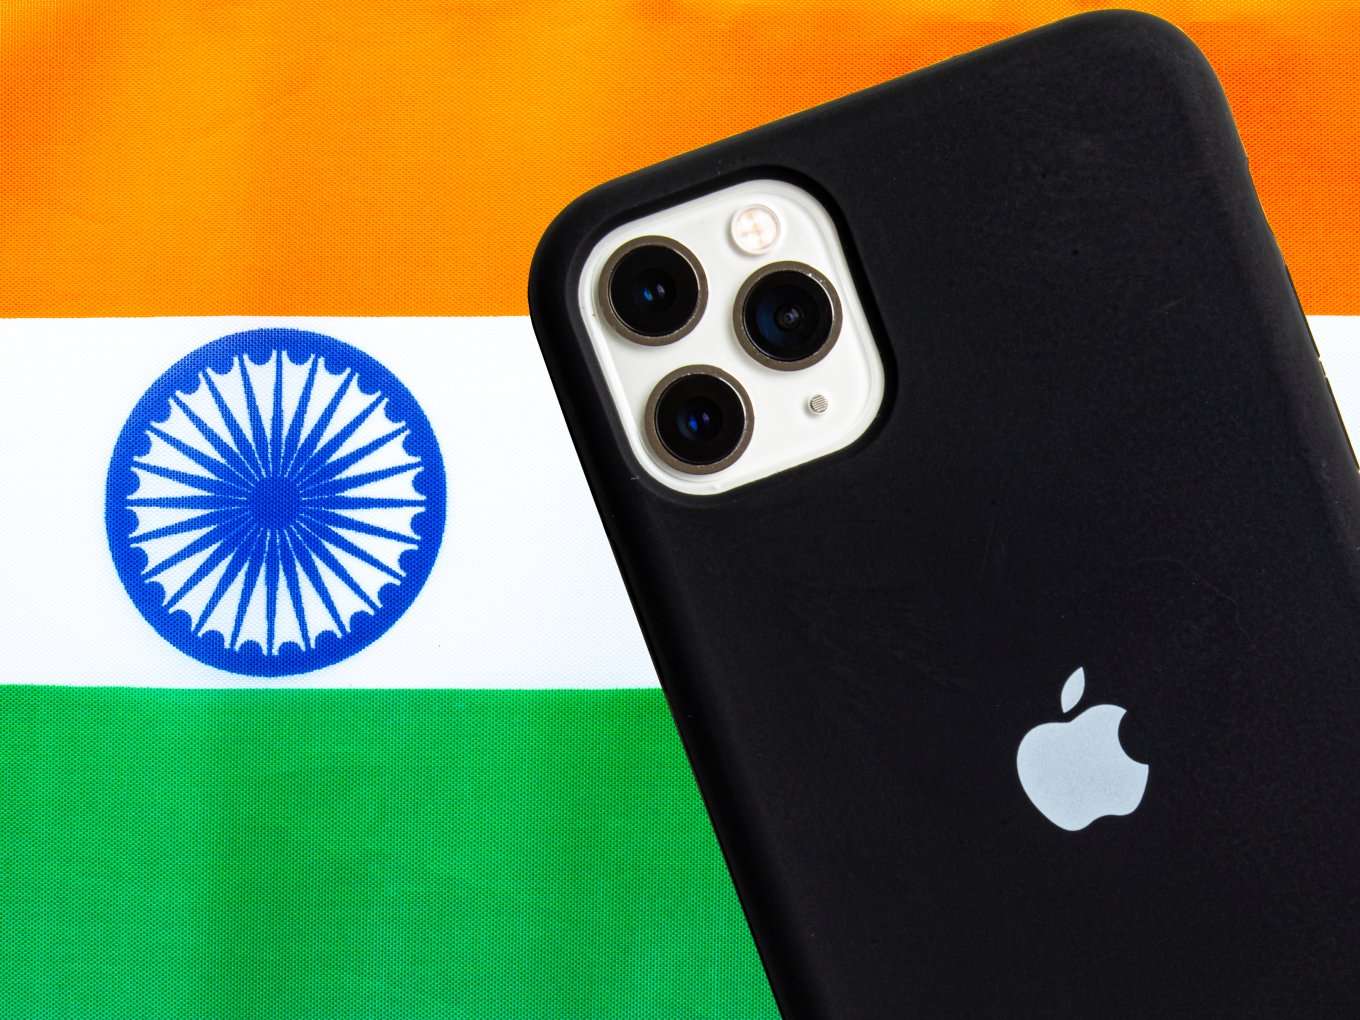 apple india iphone production impacted by Covid